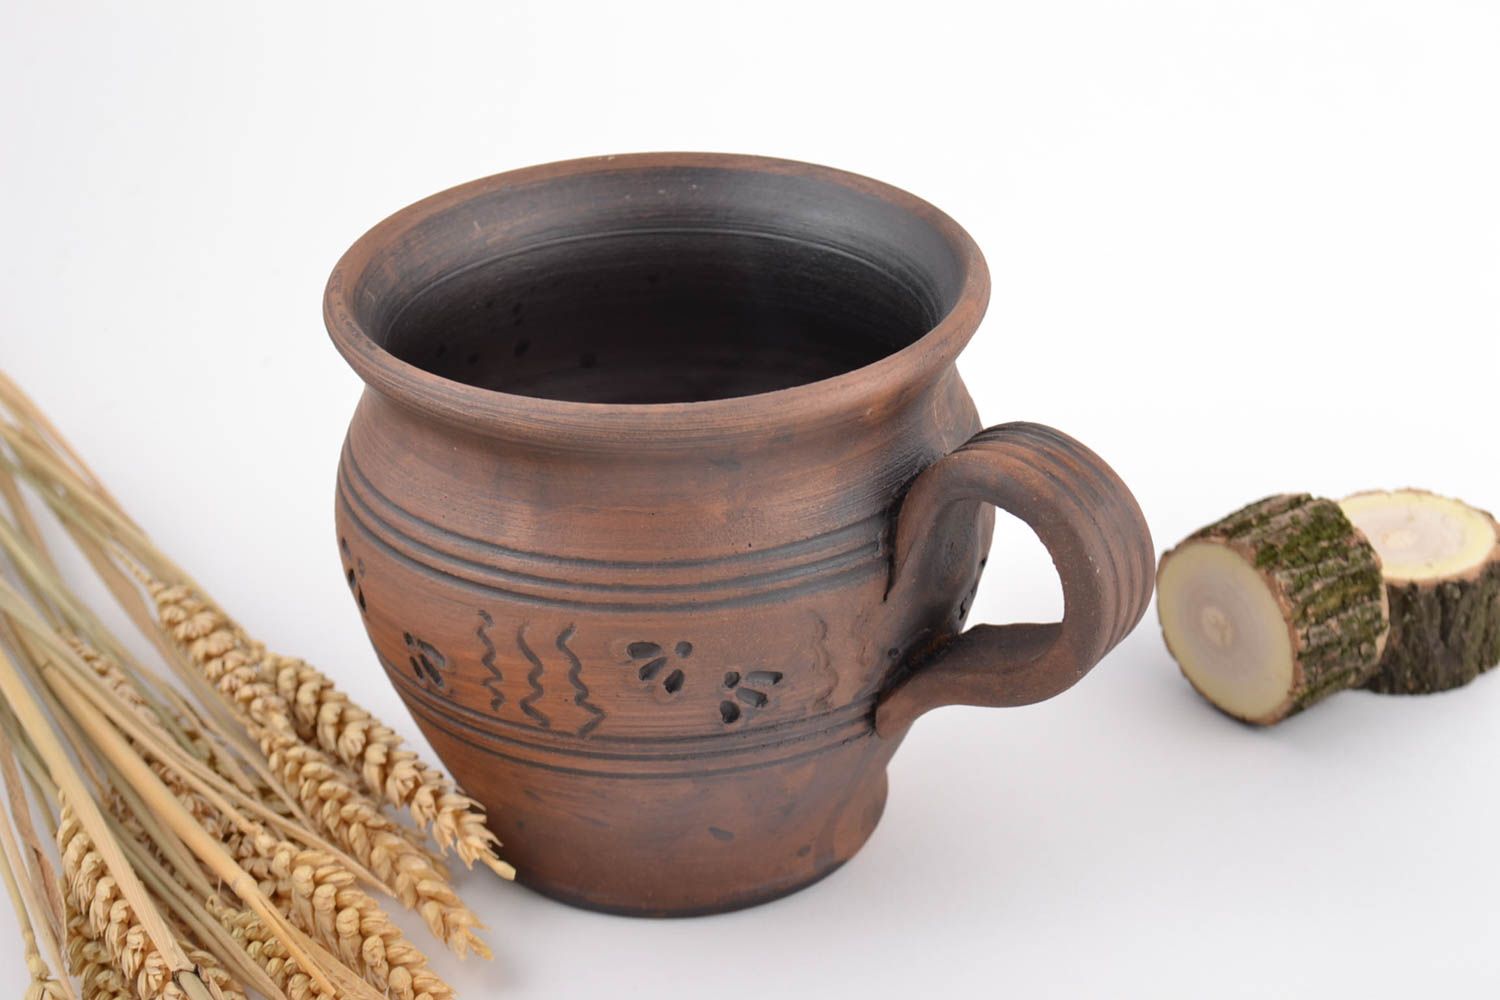 XXL 18 oz clay cup with hande and rustic pattern photo 1